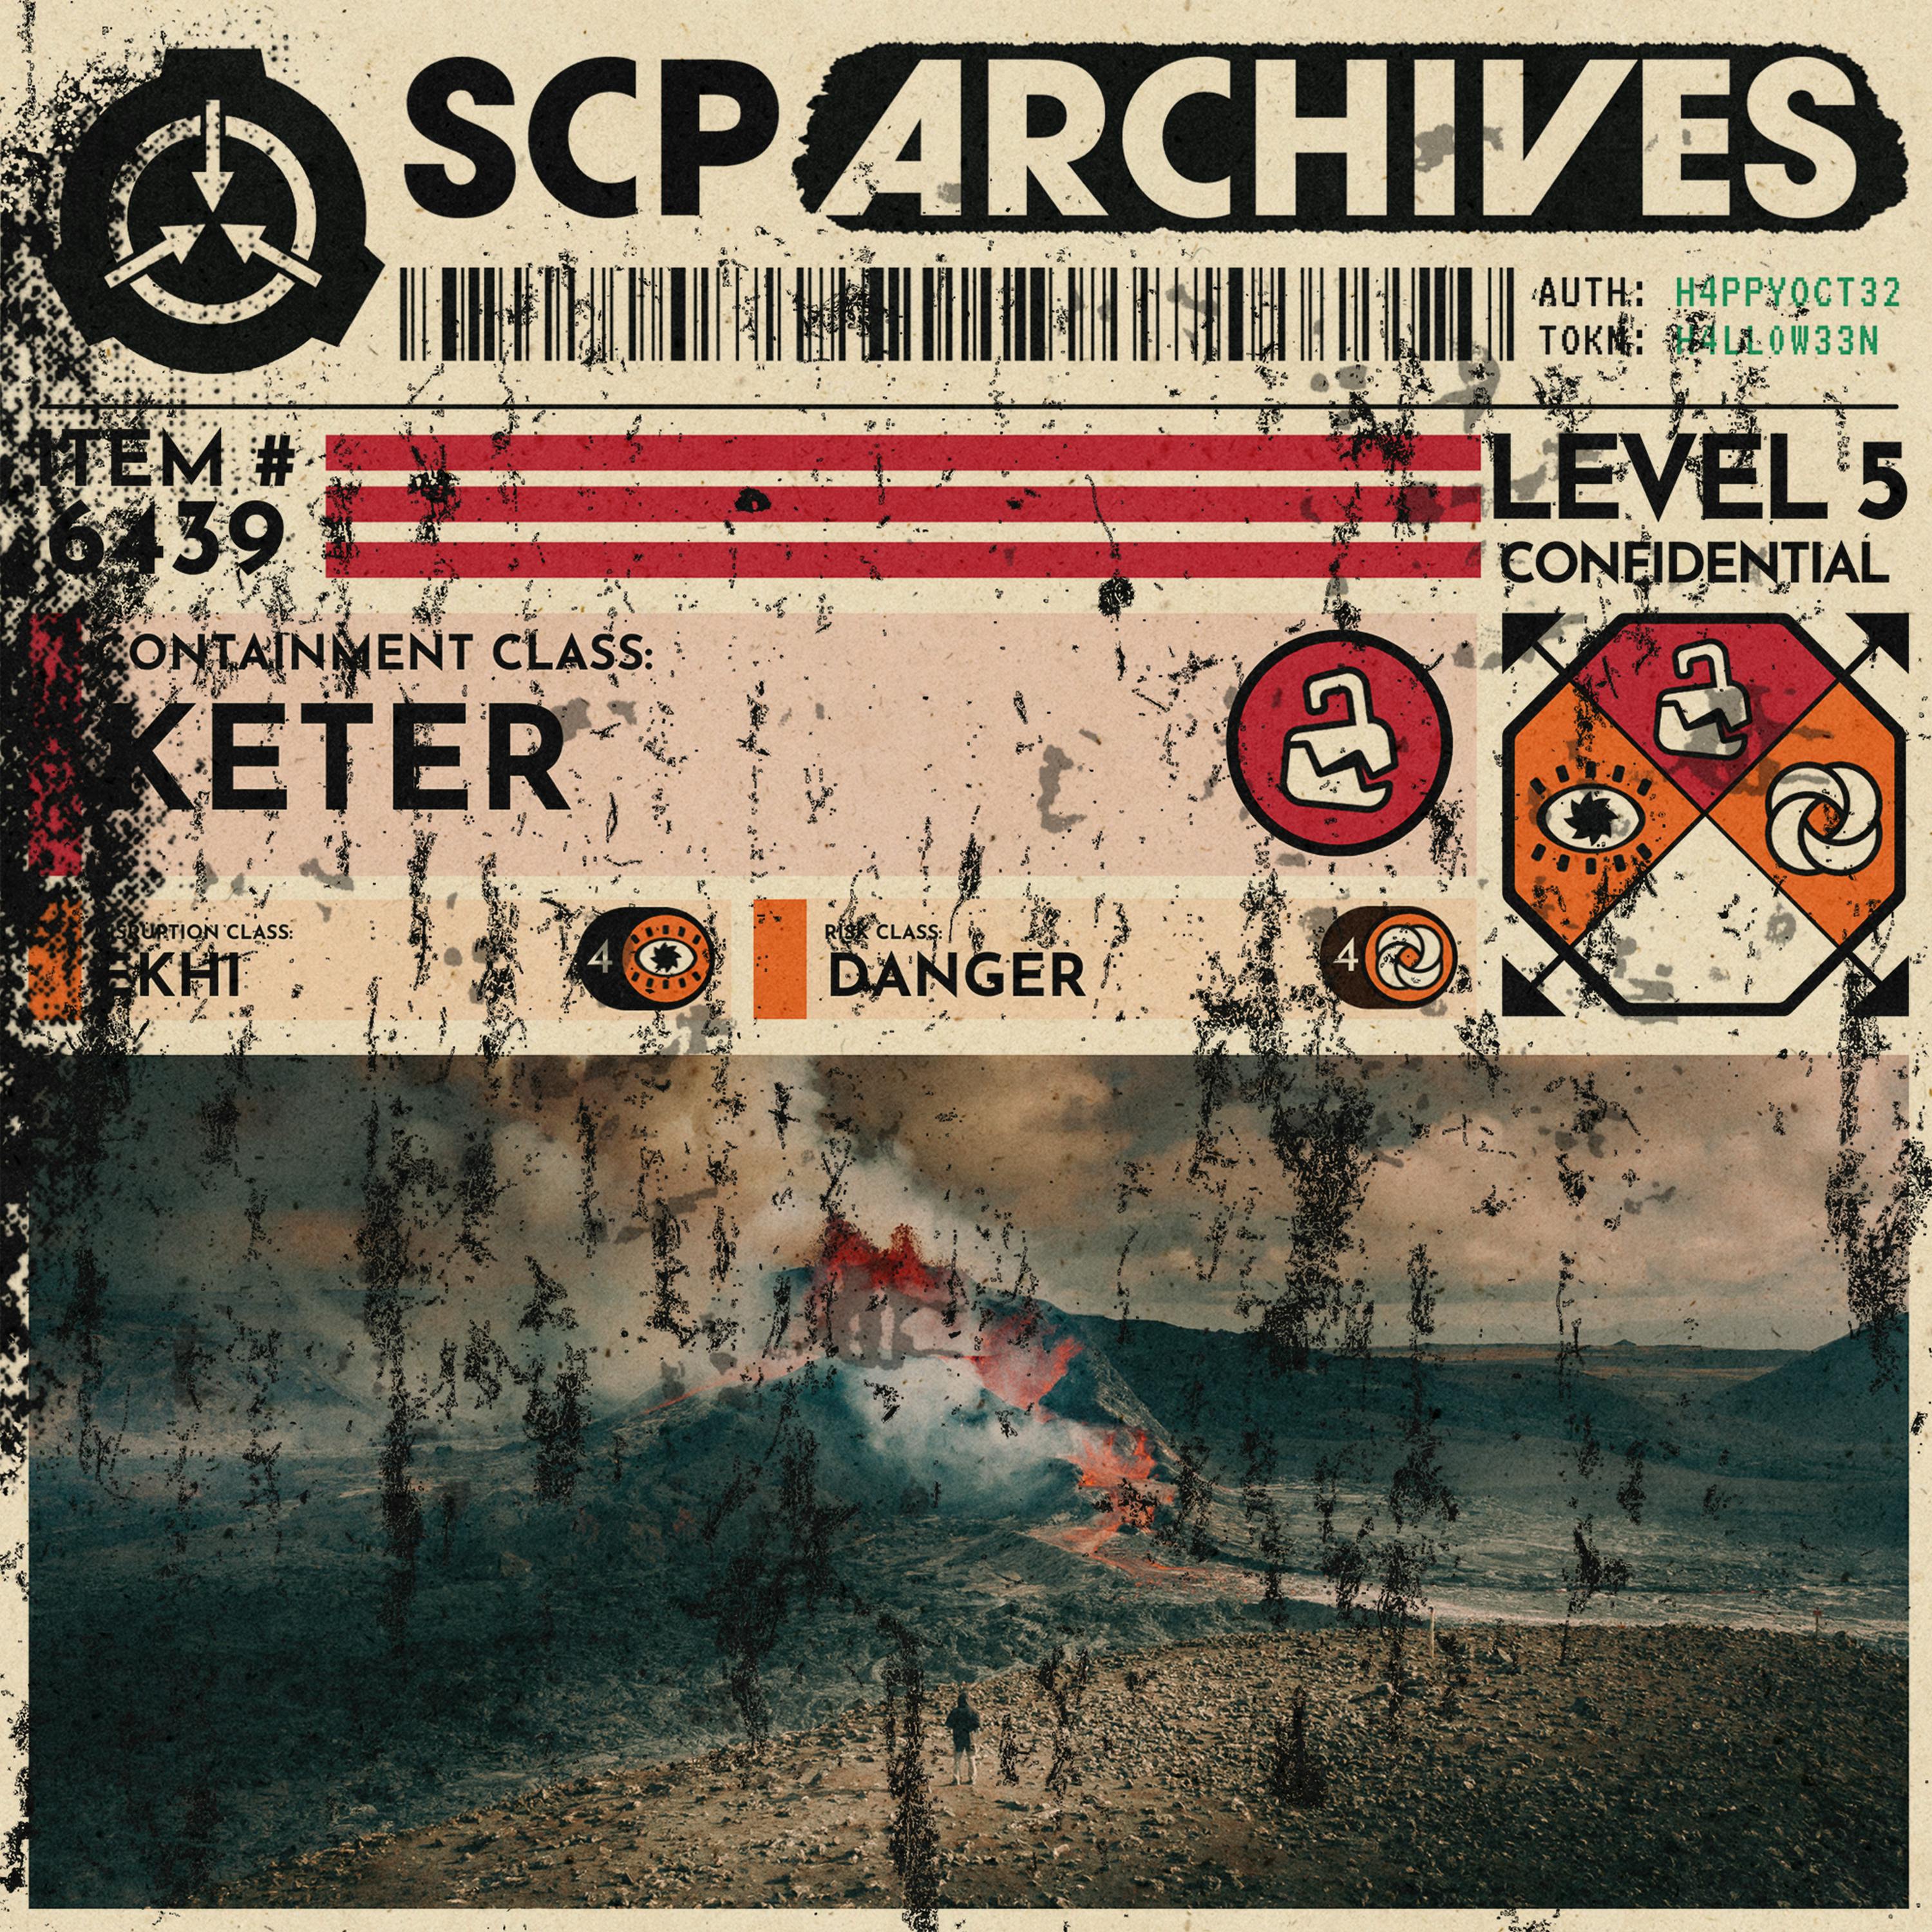 SCP Foundation – Podcast – Podtail